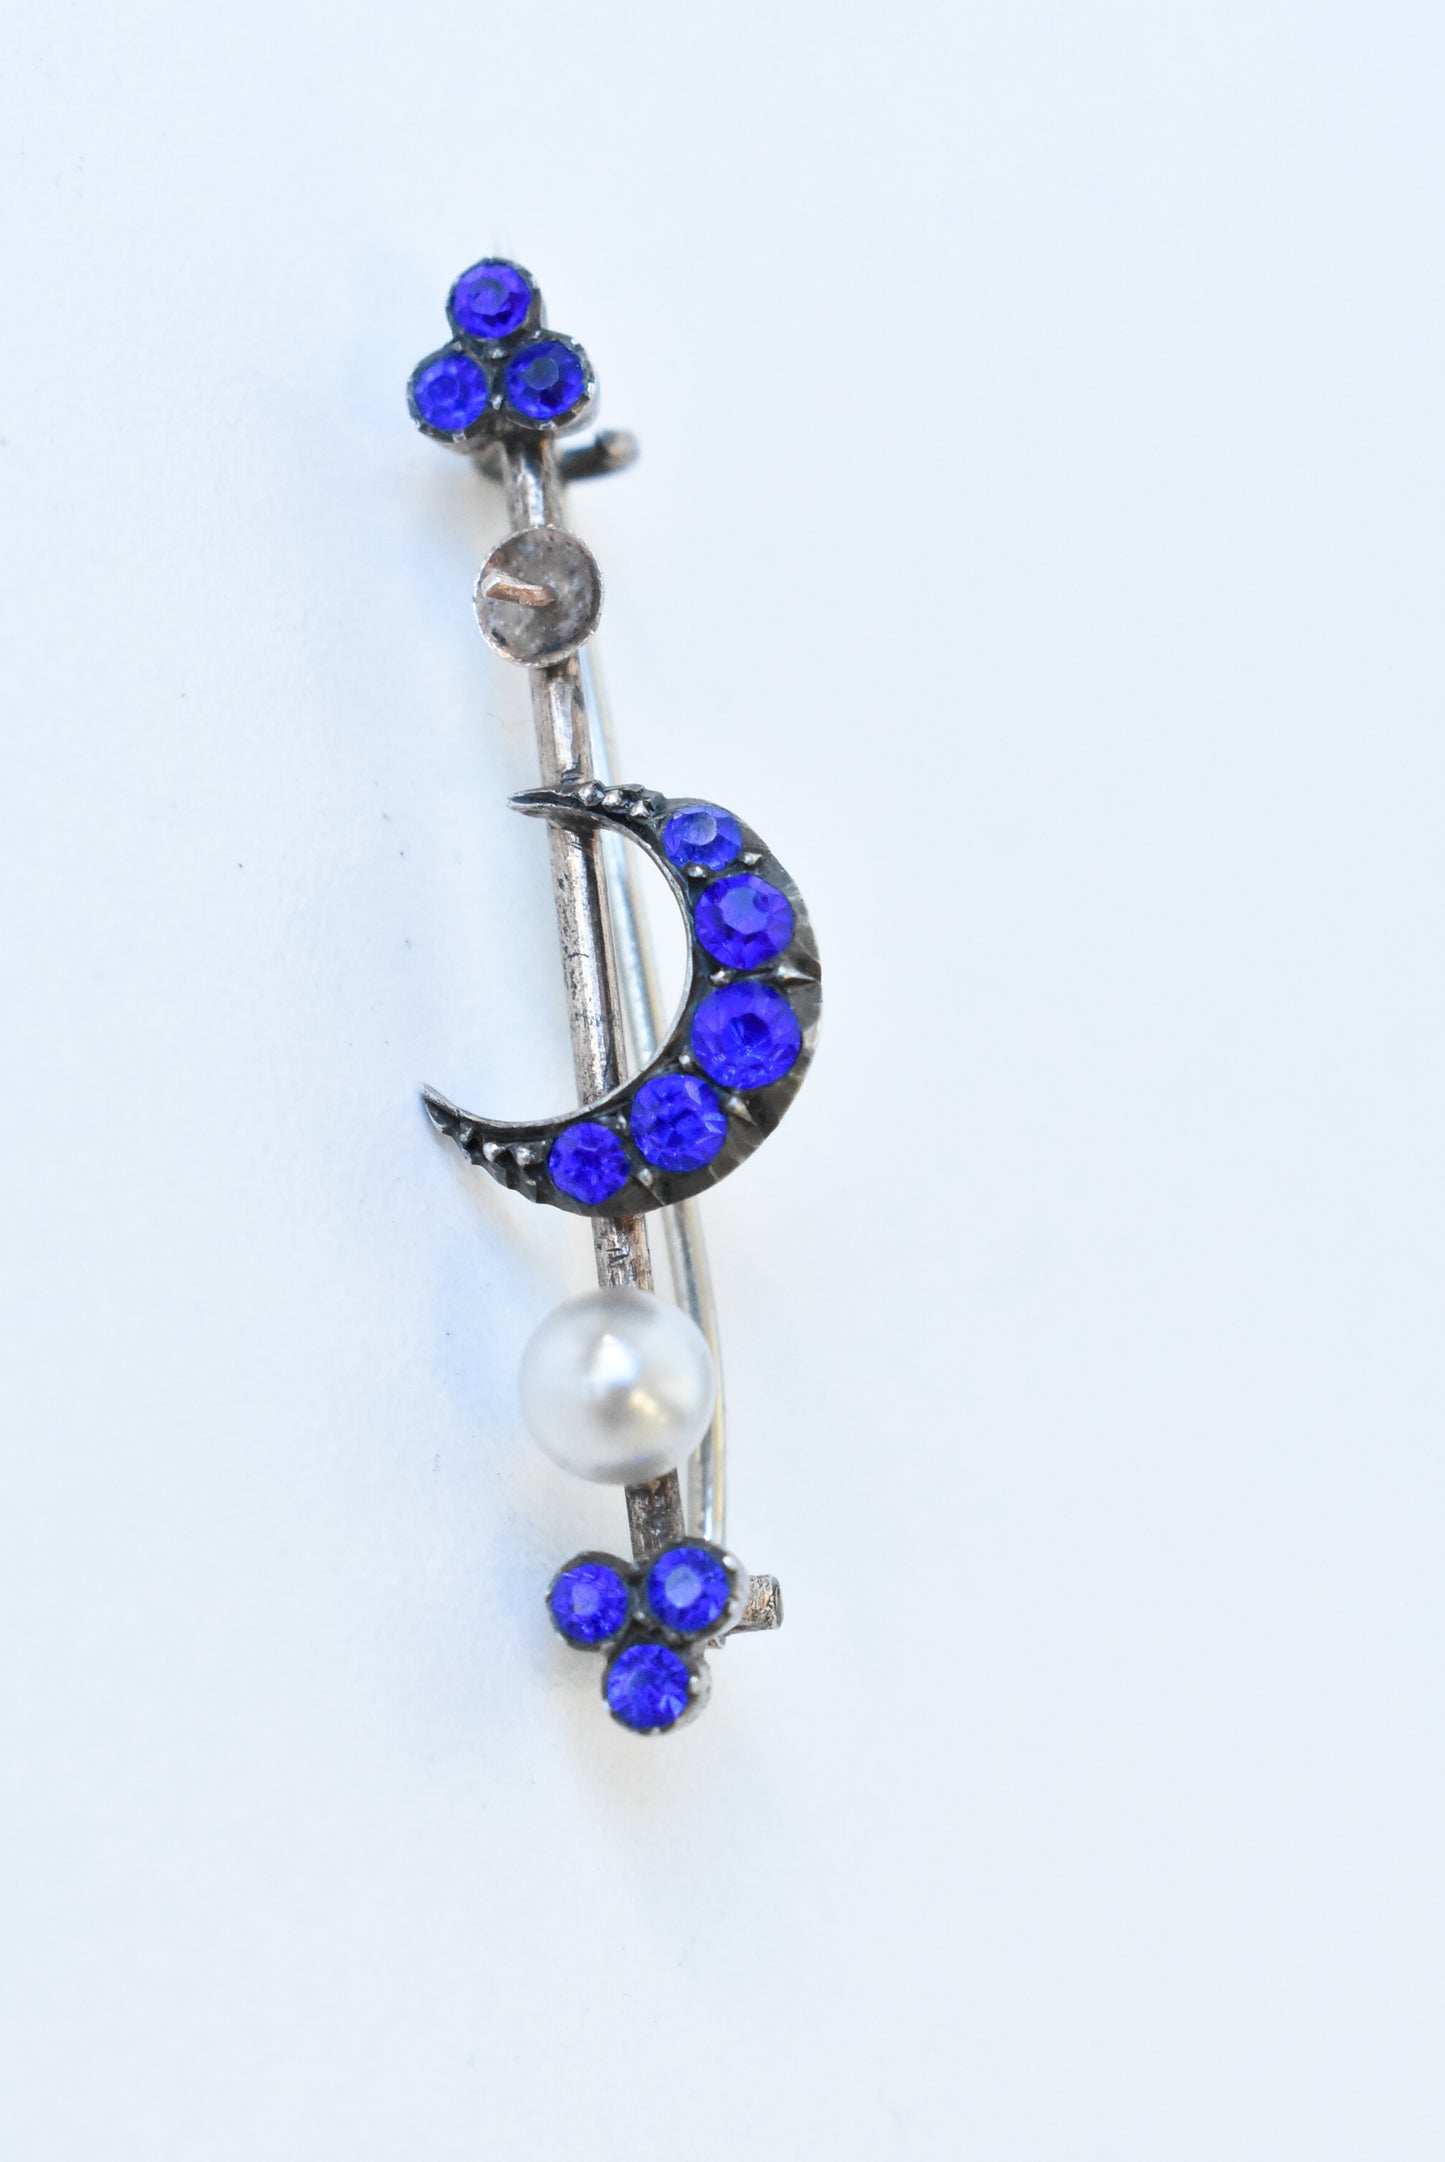 Crescent moon early 1900's vintage blue and silver brooch